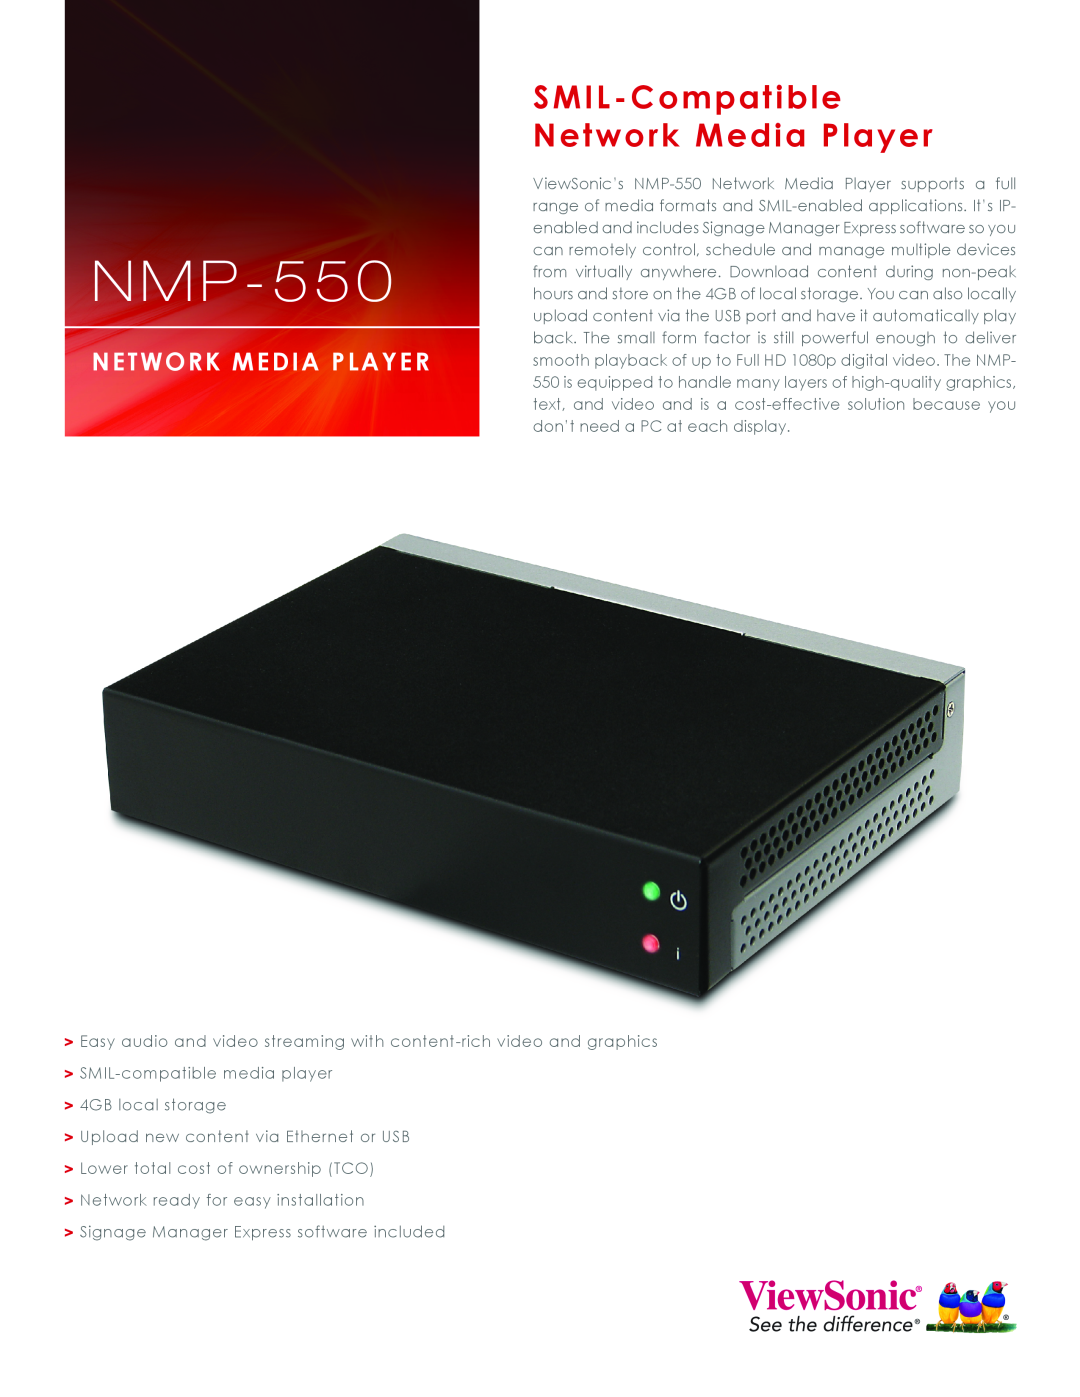 ViewSonic NMP-550 manual SMIL-CompatibleNetwork Media Player, SMIL-compatiblemedia player 4GB local storage 